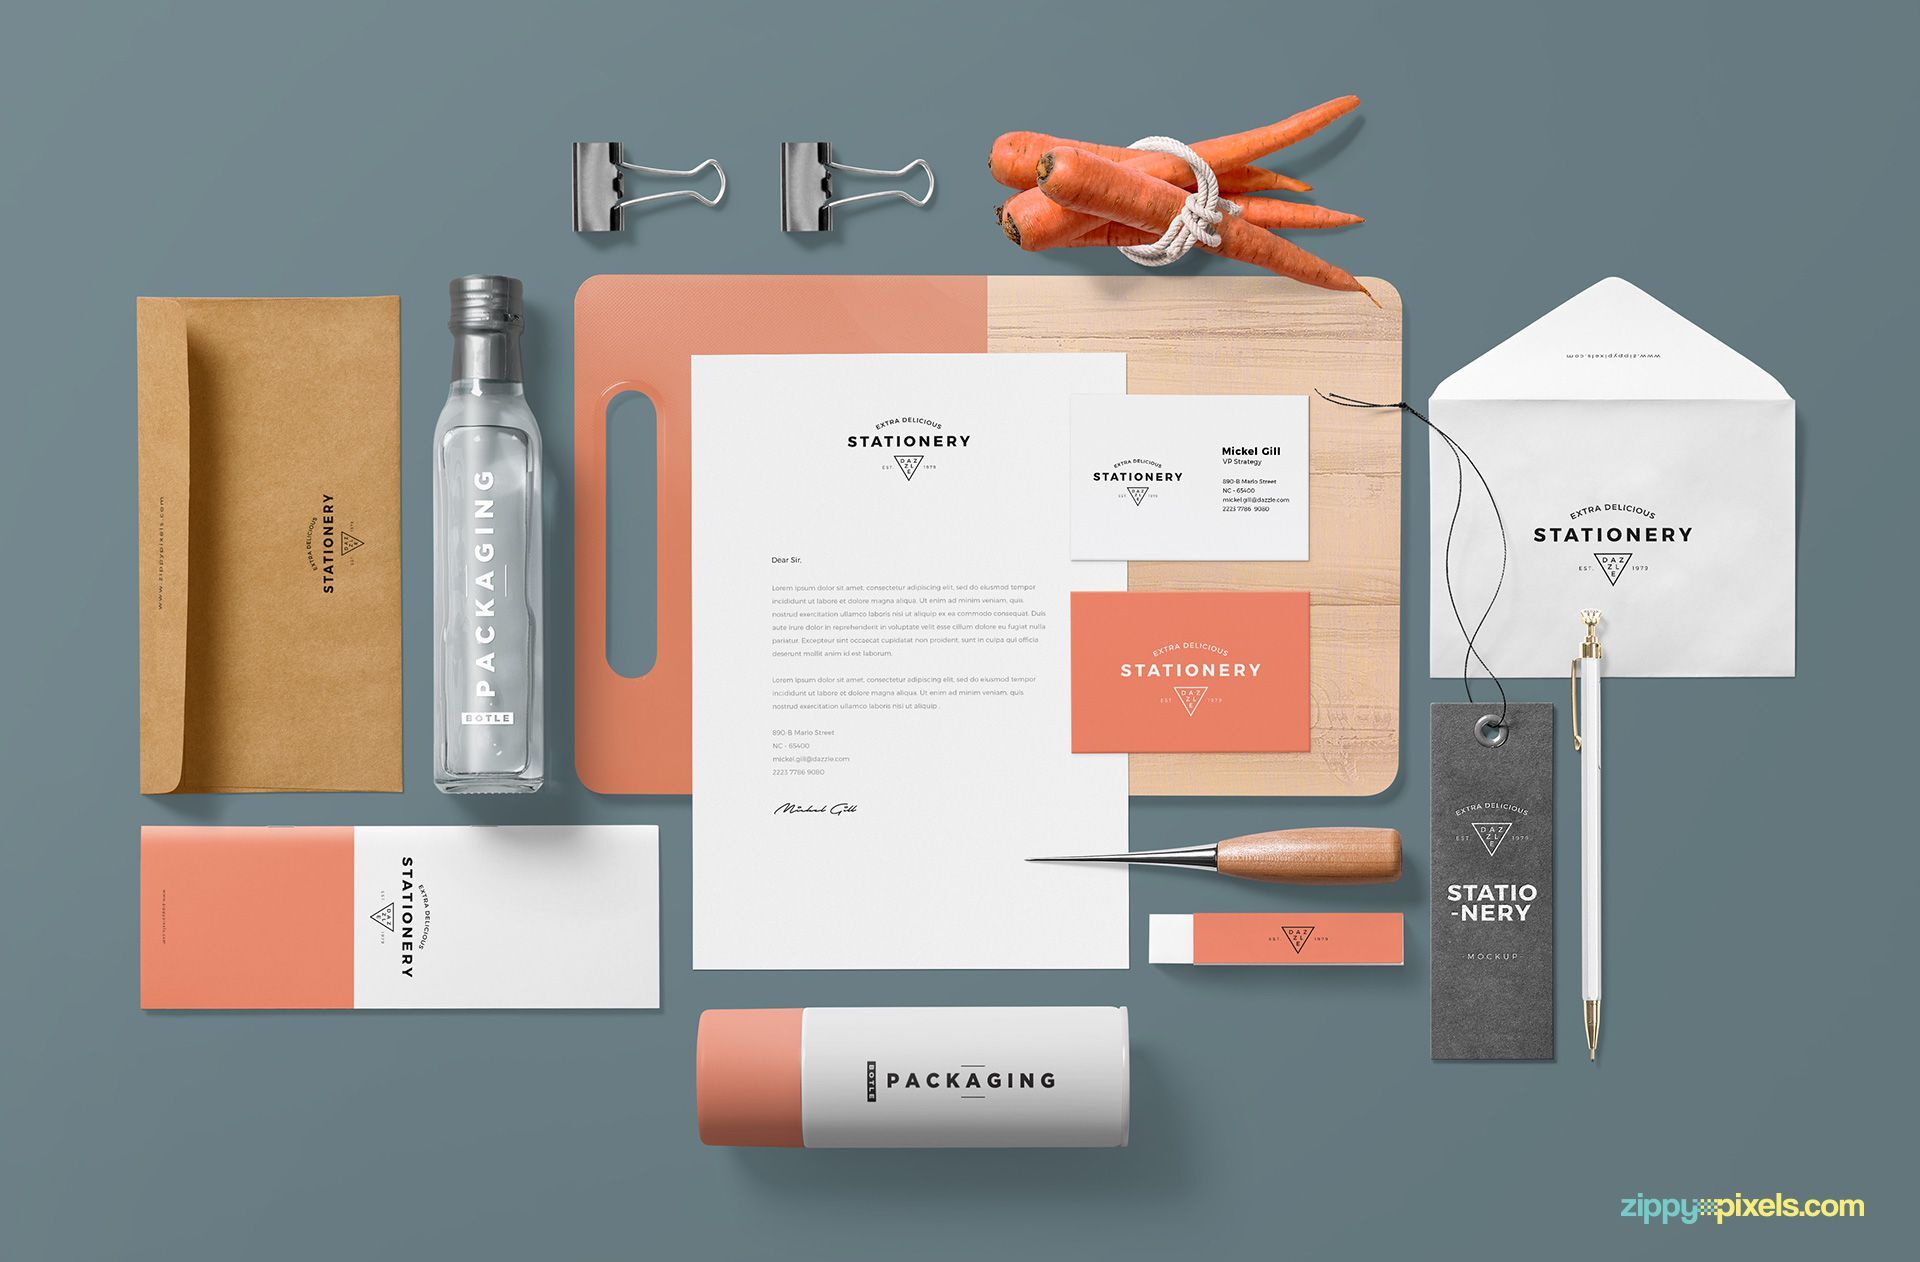 Mockup Of A Gorgeous Branding Design Layout FREE PSD